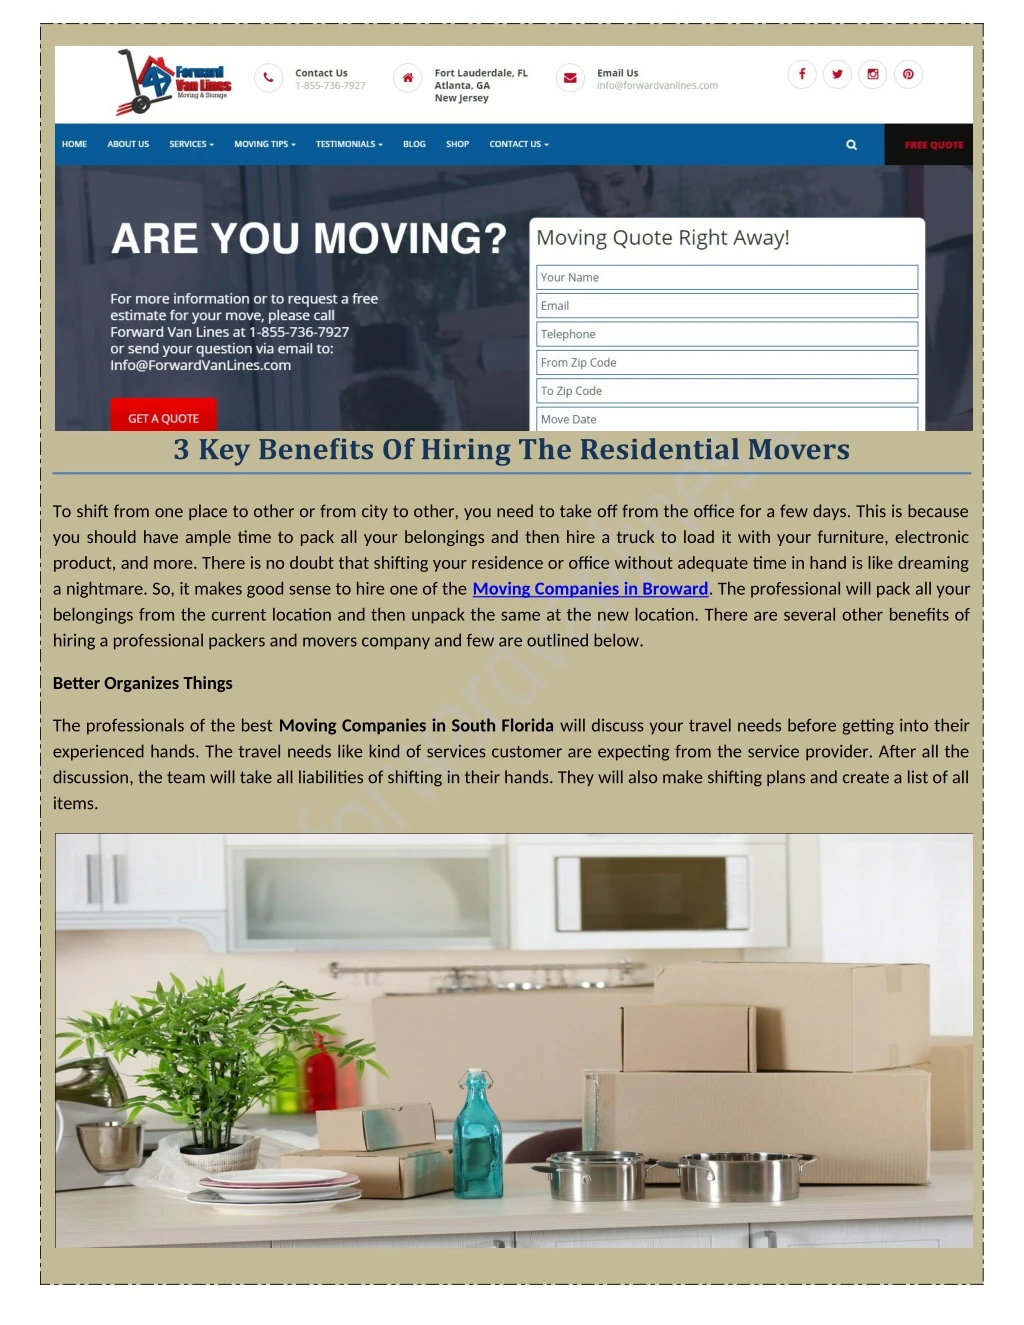 3 key benefits of hiring the residential movers